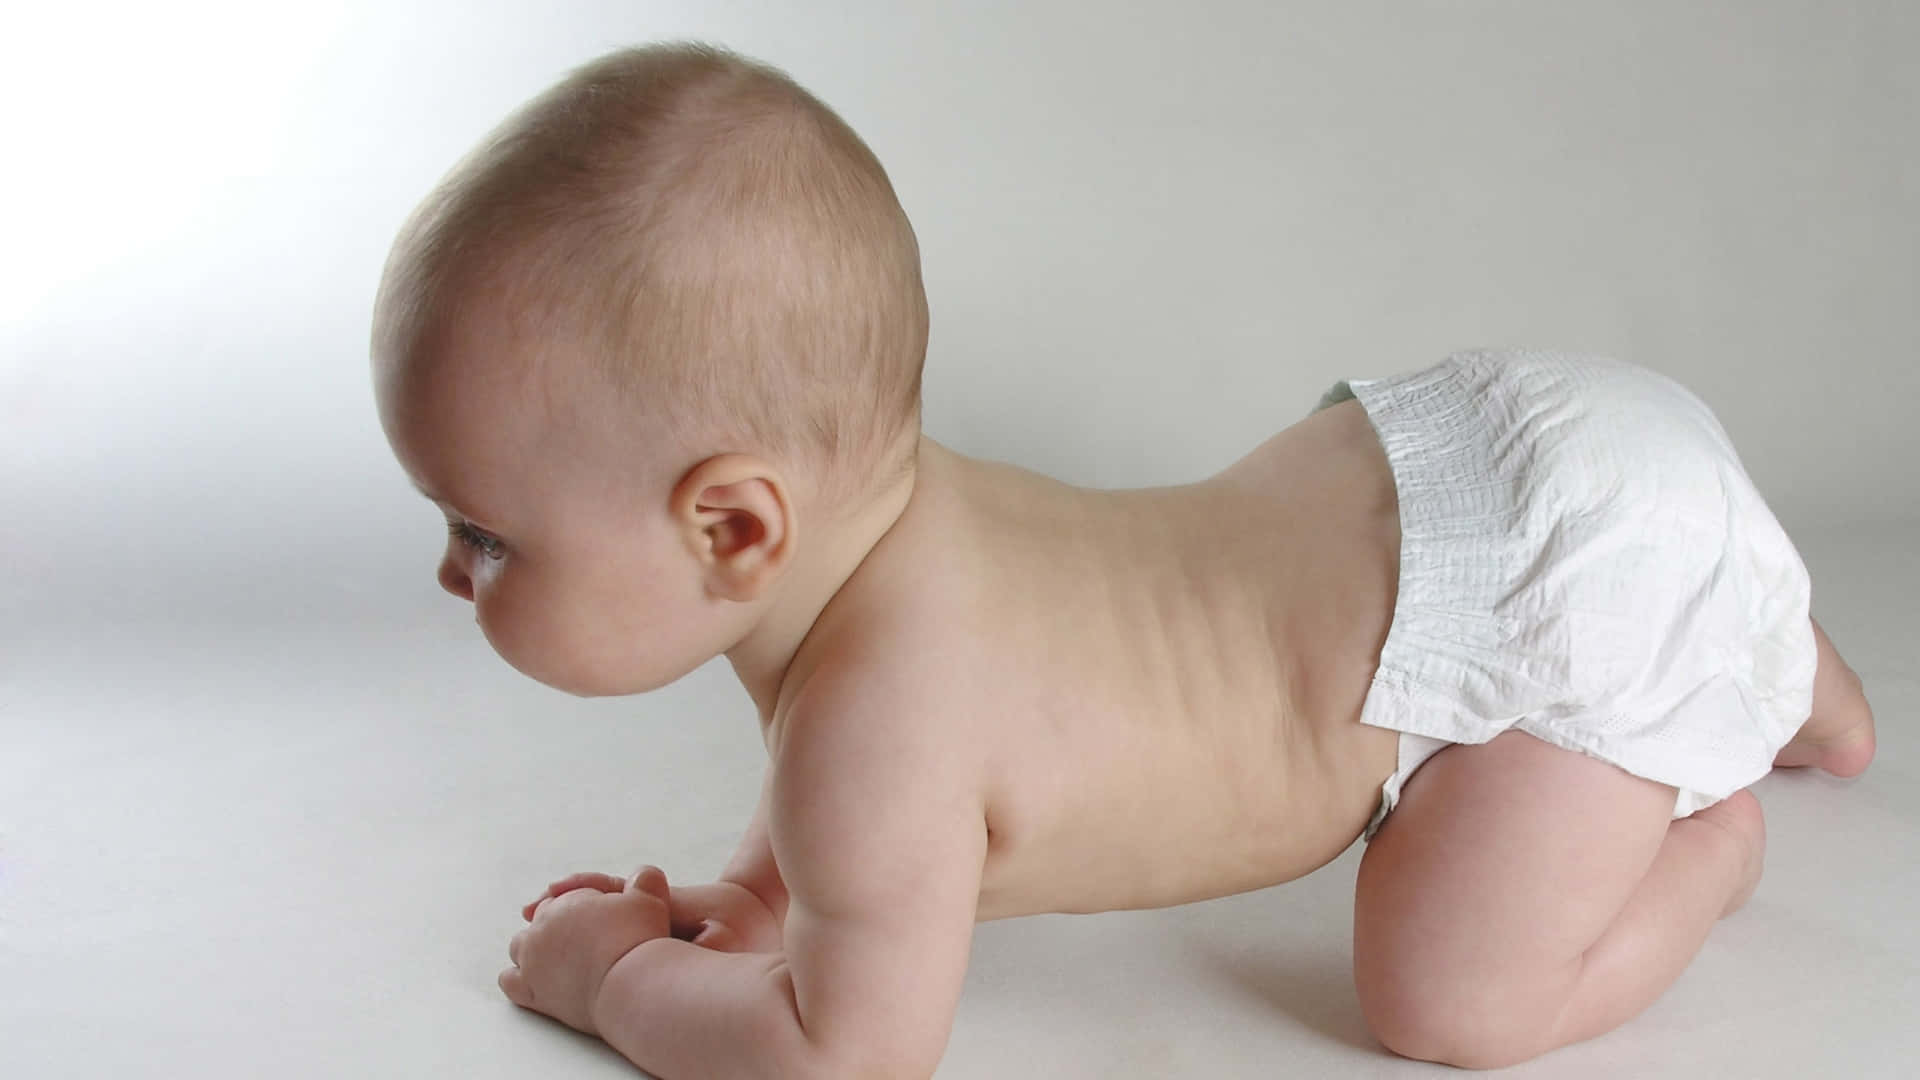 1600 Baby Standing In Diaper Stock Photos Pictures  RoyaltyFree Images   iStock  Baby crawling